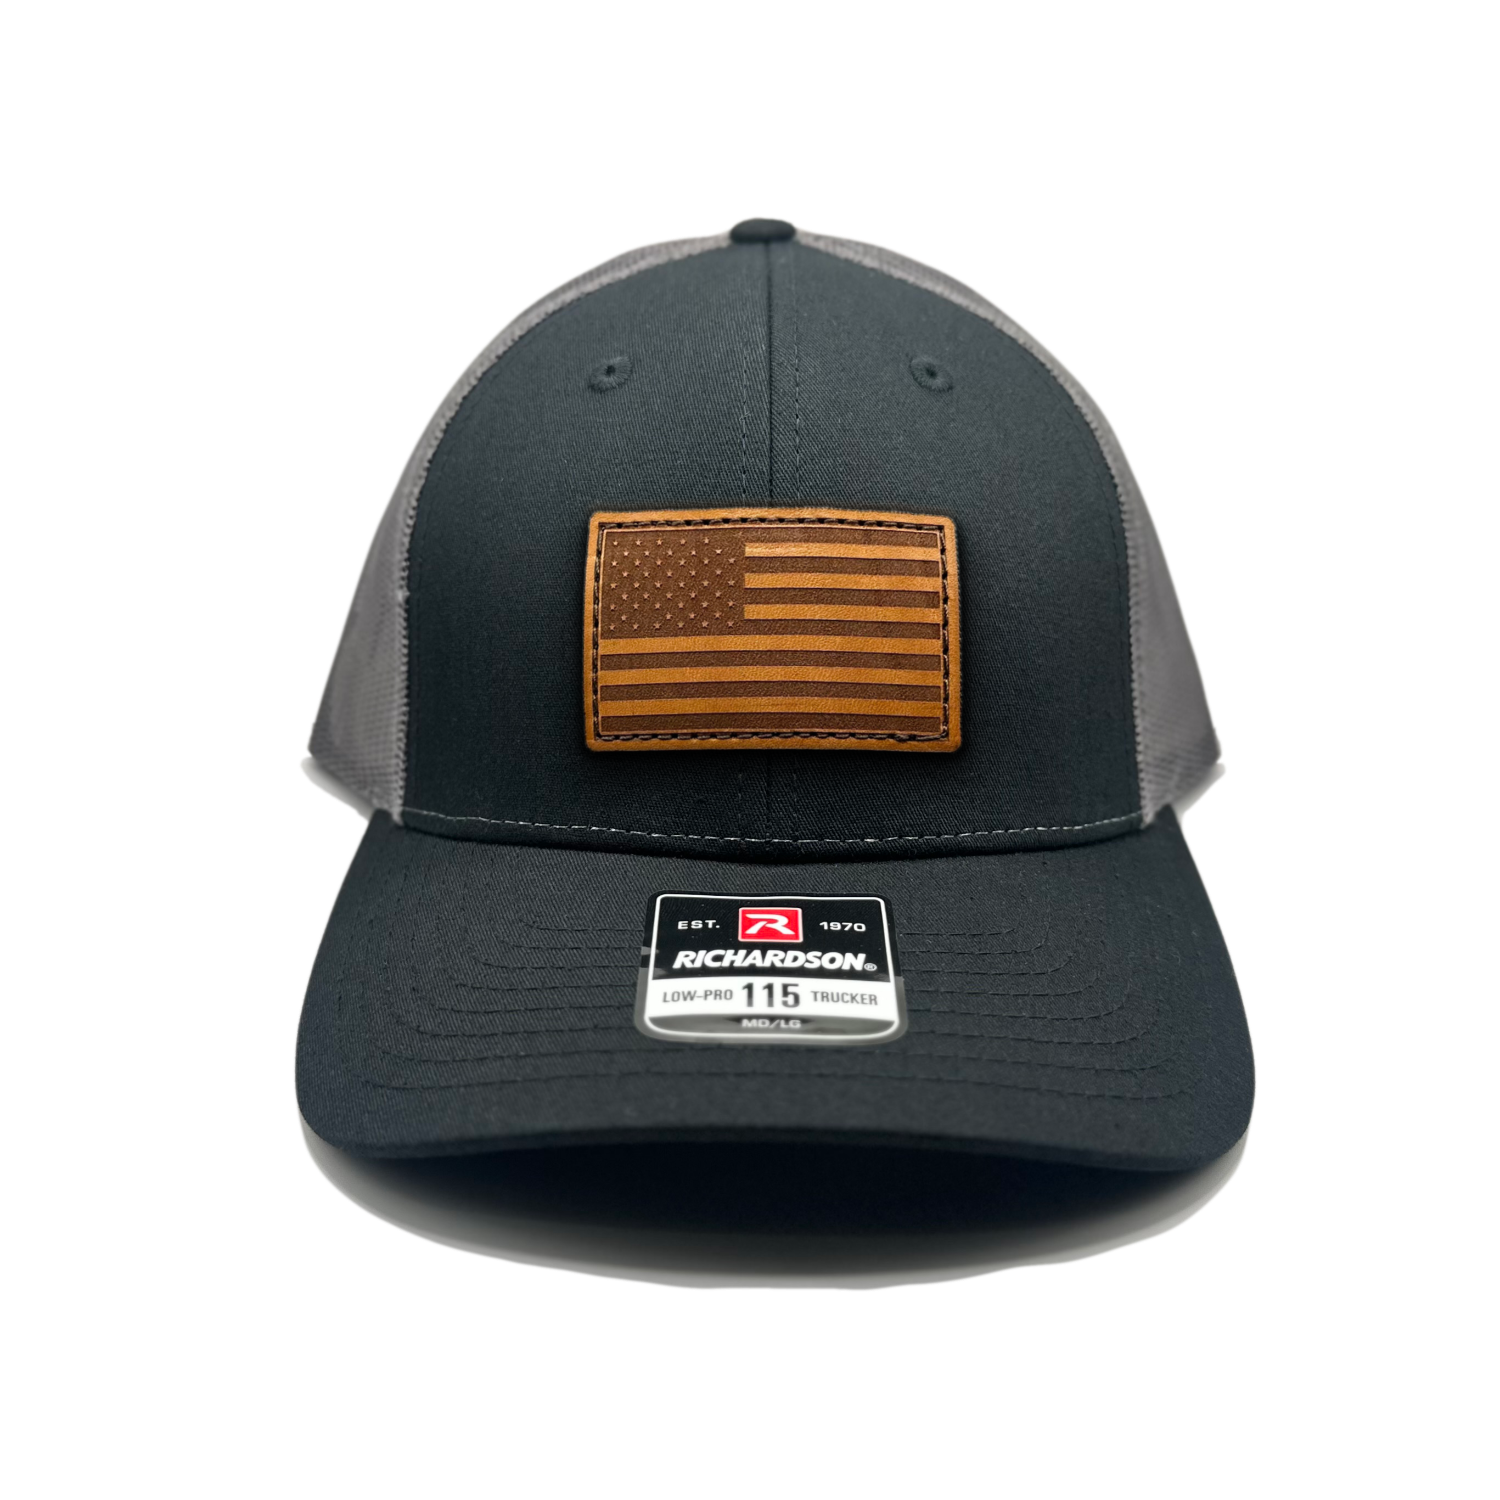 Image of a Black/Charcoal Richardson 115 hat with an American flag patch made of genuine leather, laser engraved and securely sewn onto the hat. The low profile trucker style hat is adjustable to fit small or M/L sizes, offering a versatile and fashionable accessory for any occasion."